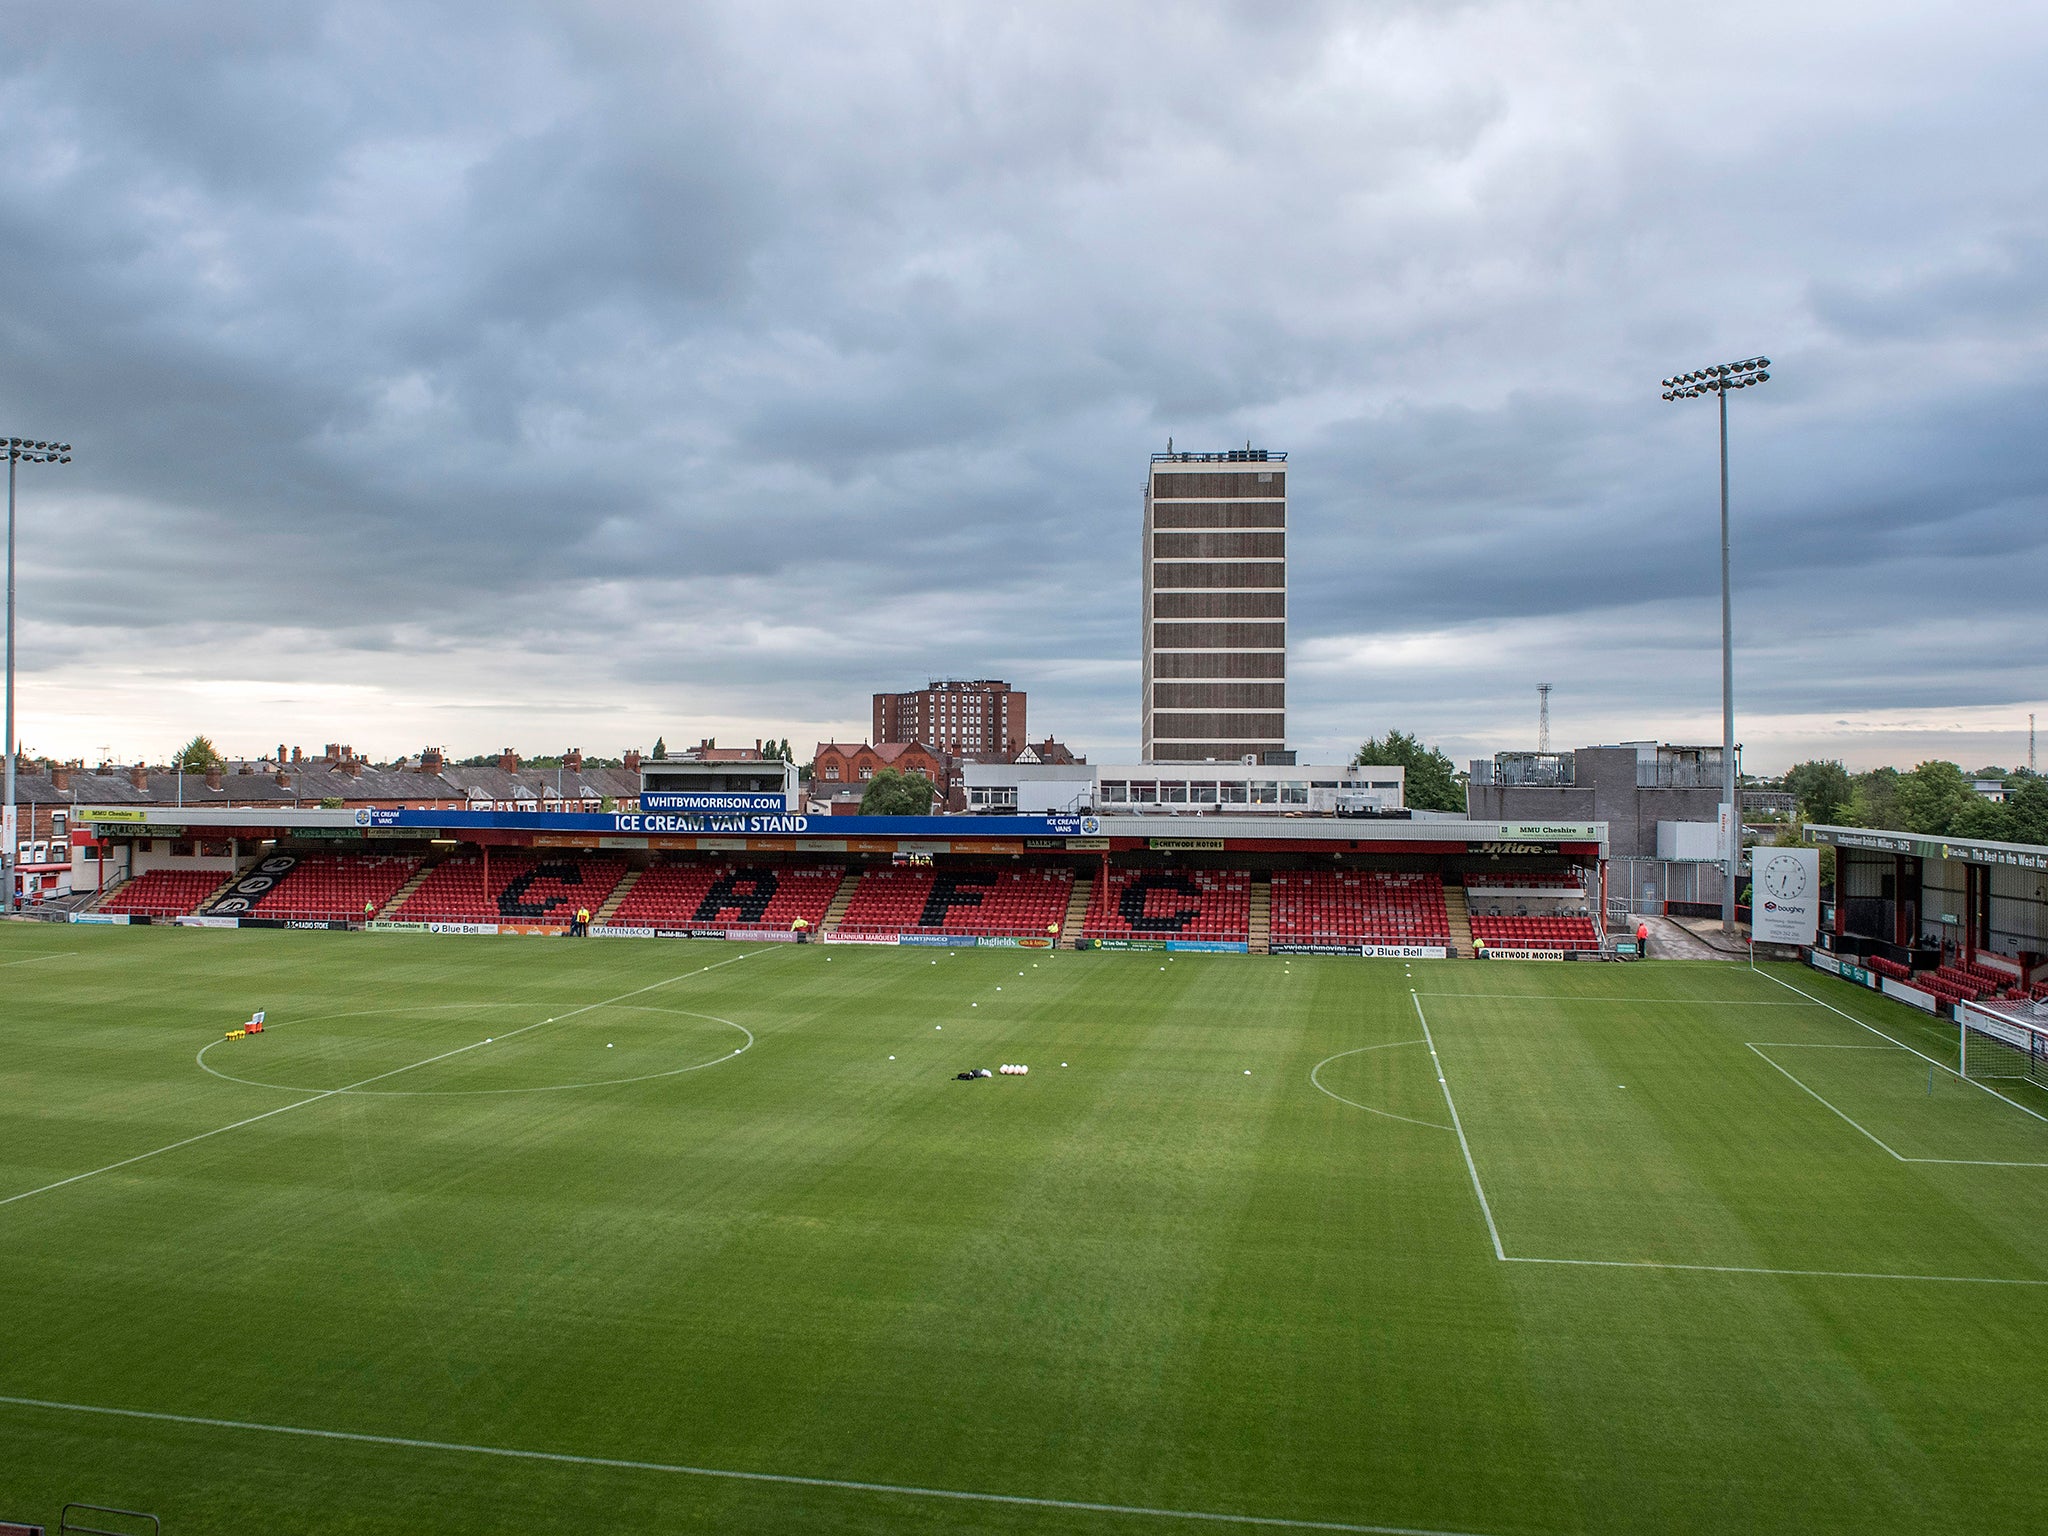 Crewe Alexandra chairman John Bowler refused to discuss the Barry Bennell scandal